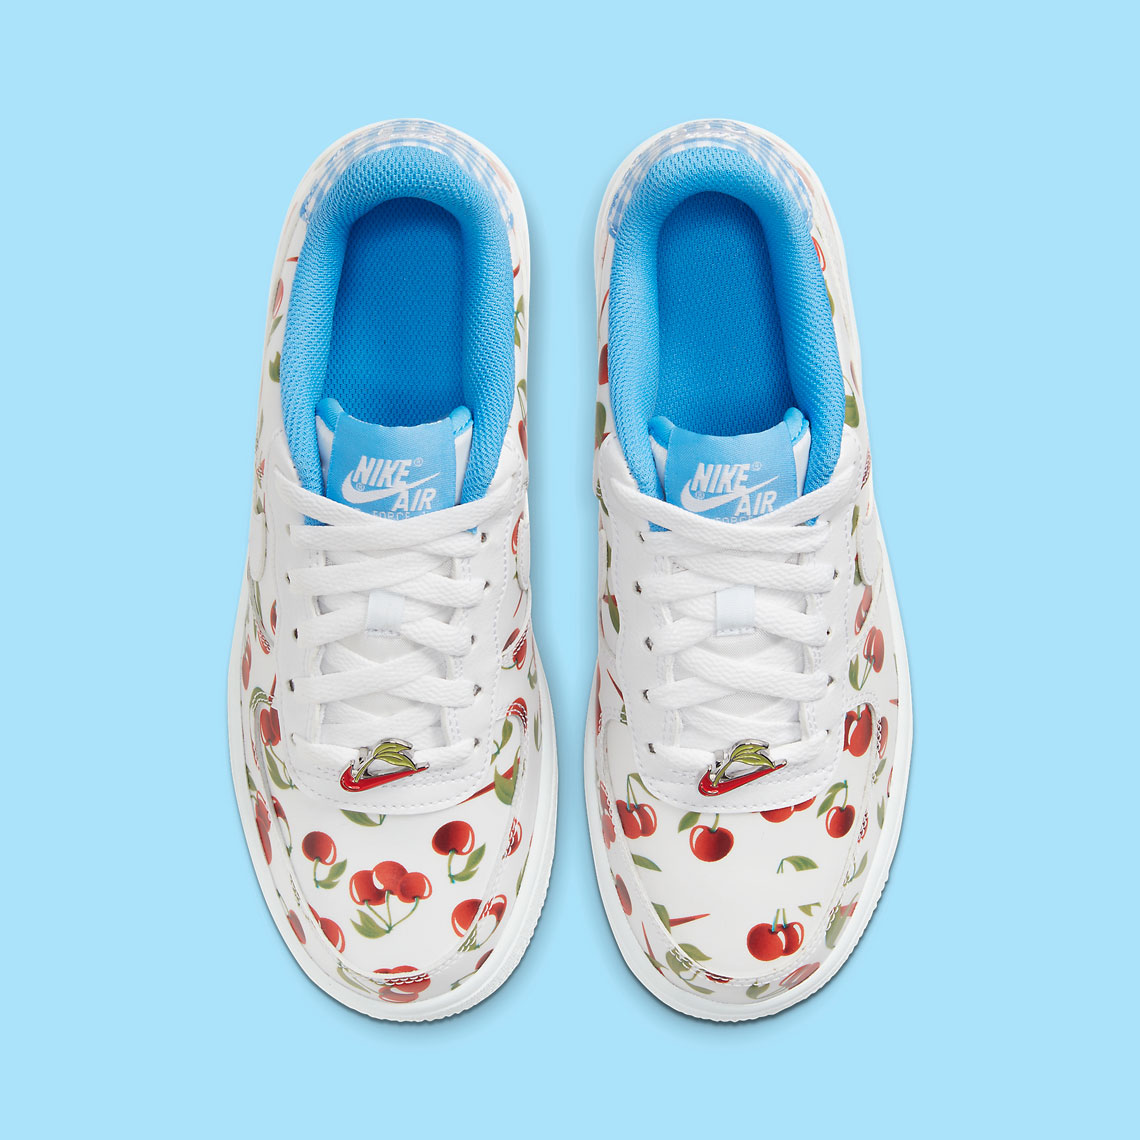 nike shoes with cherries